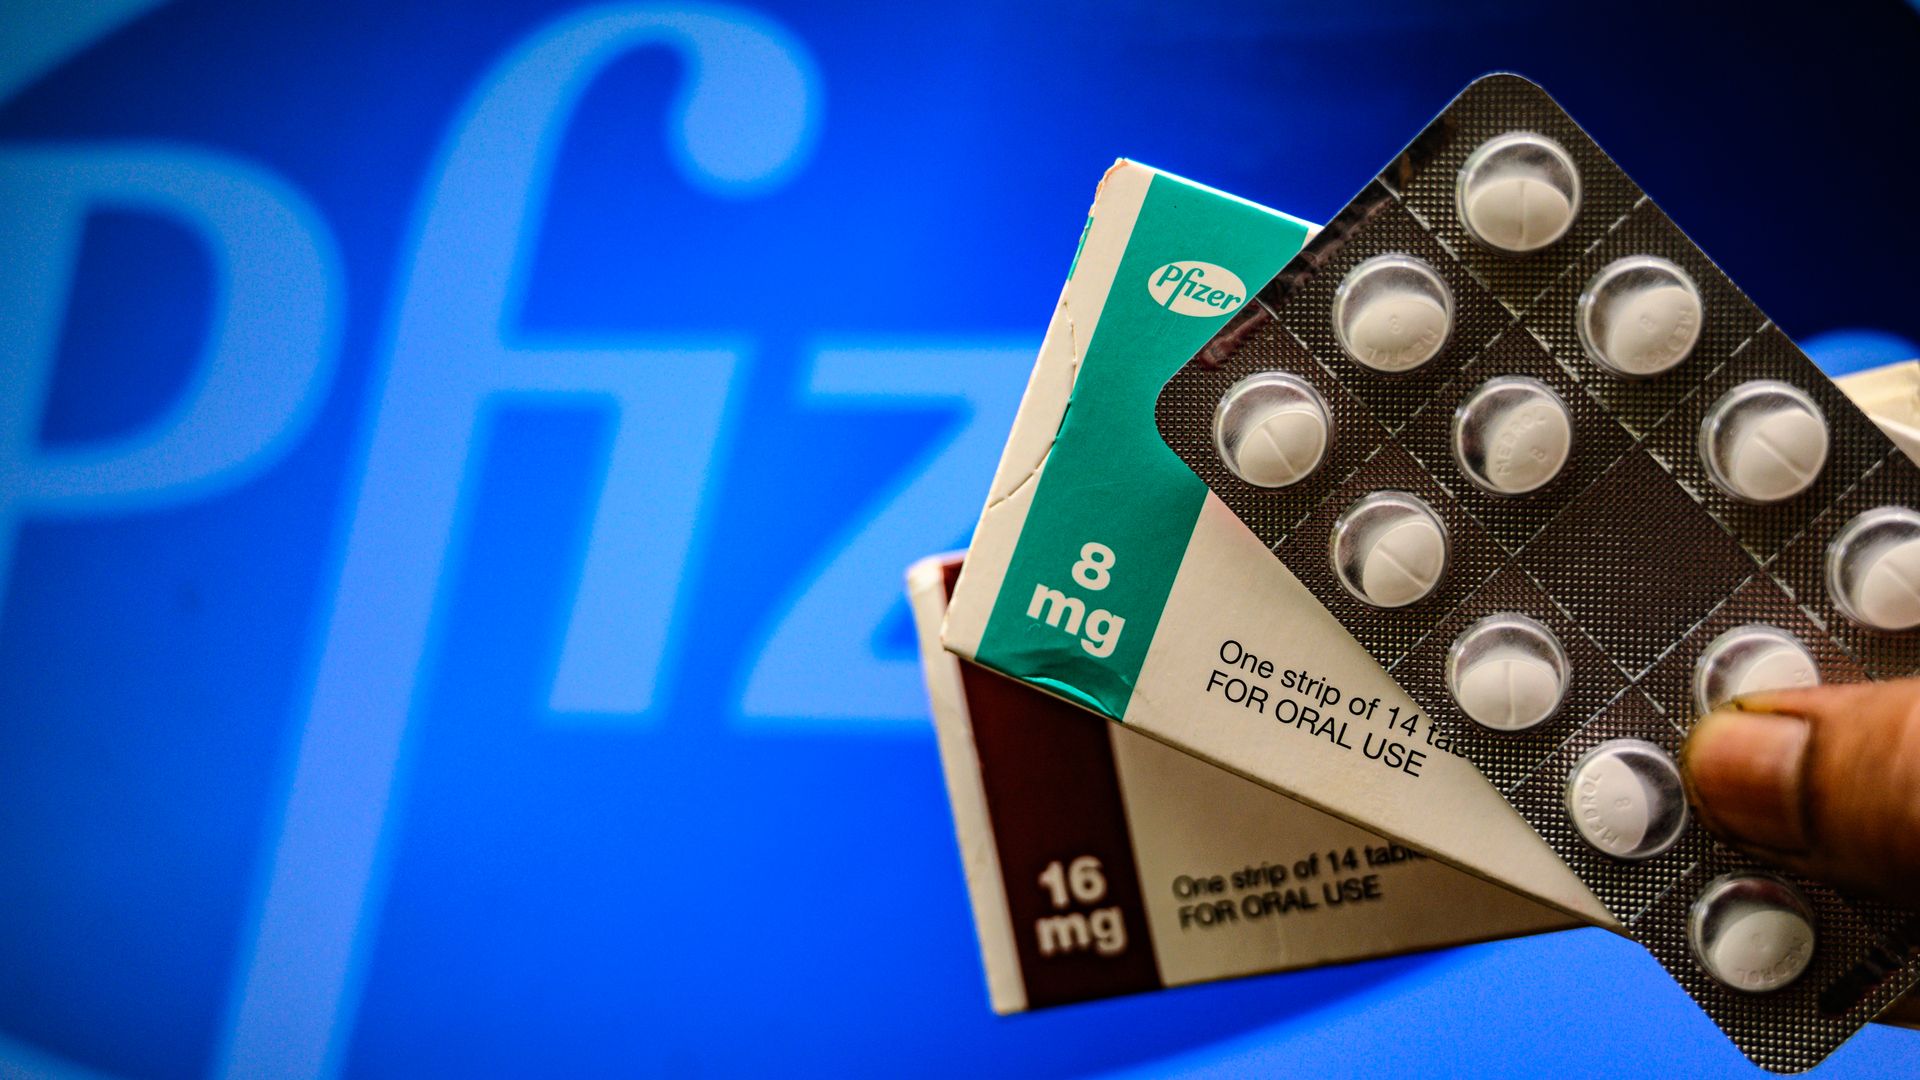 Pills being held in front of the Pfizer logo